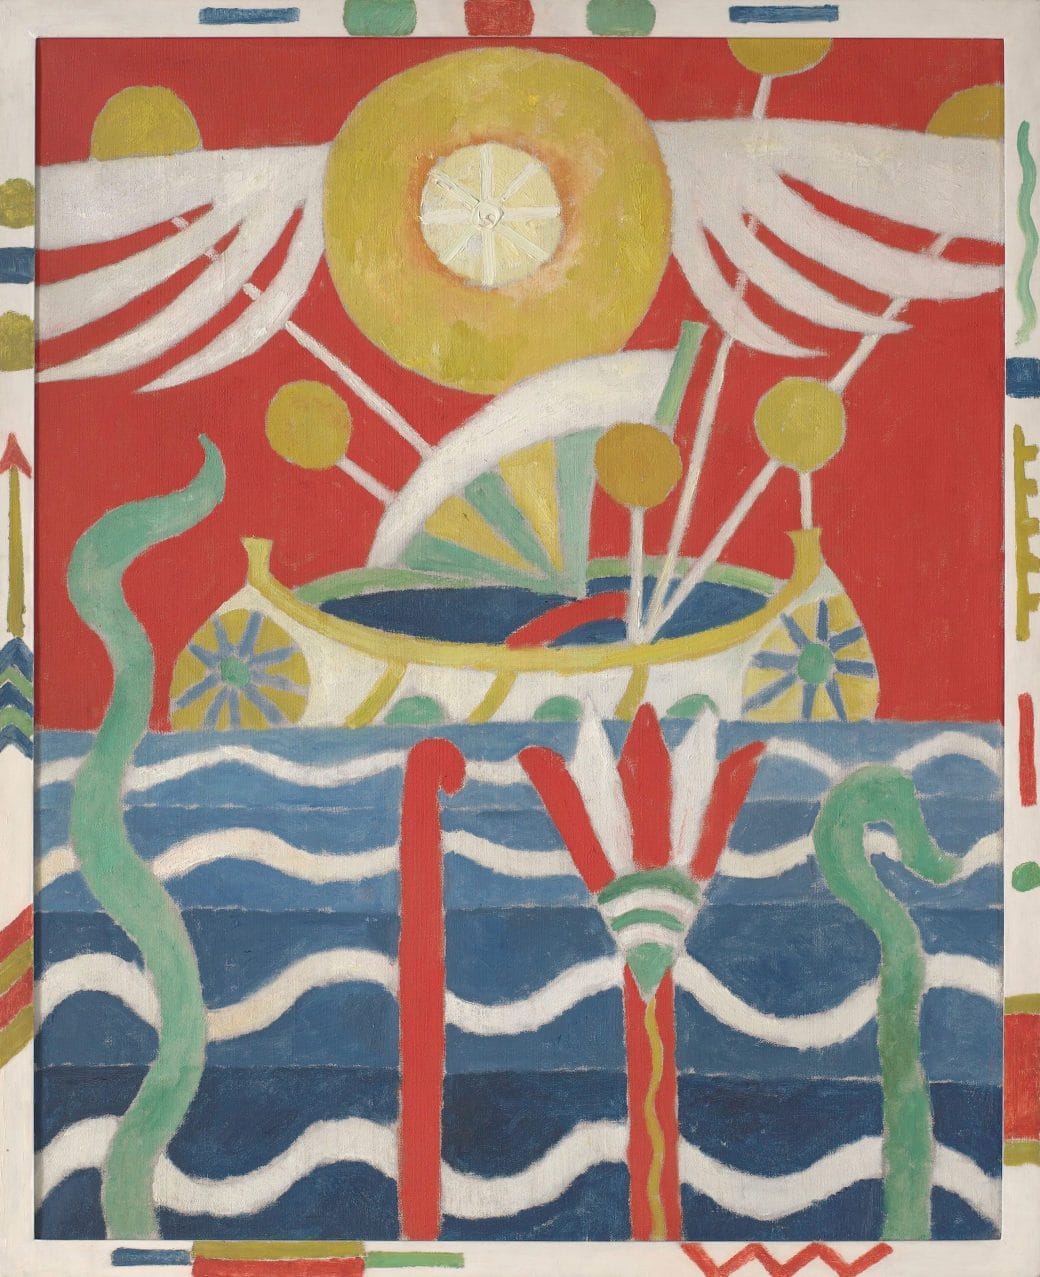 Marsden Hartley's Schiff with abstract images in bright reds, yellows, and blues. 